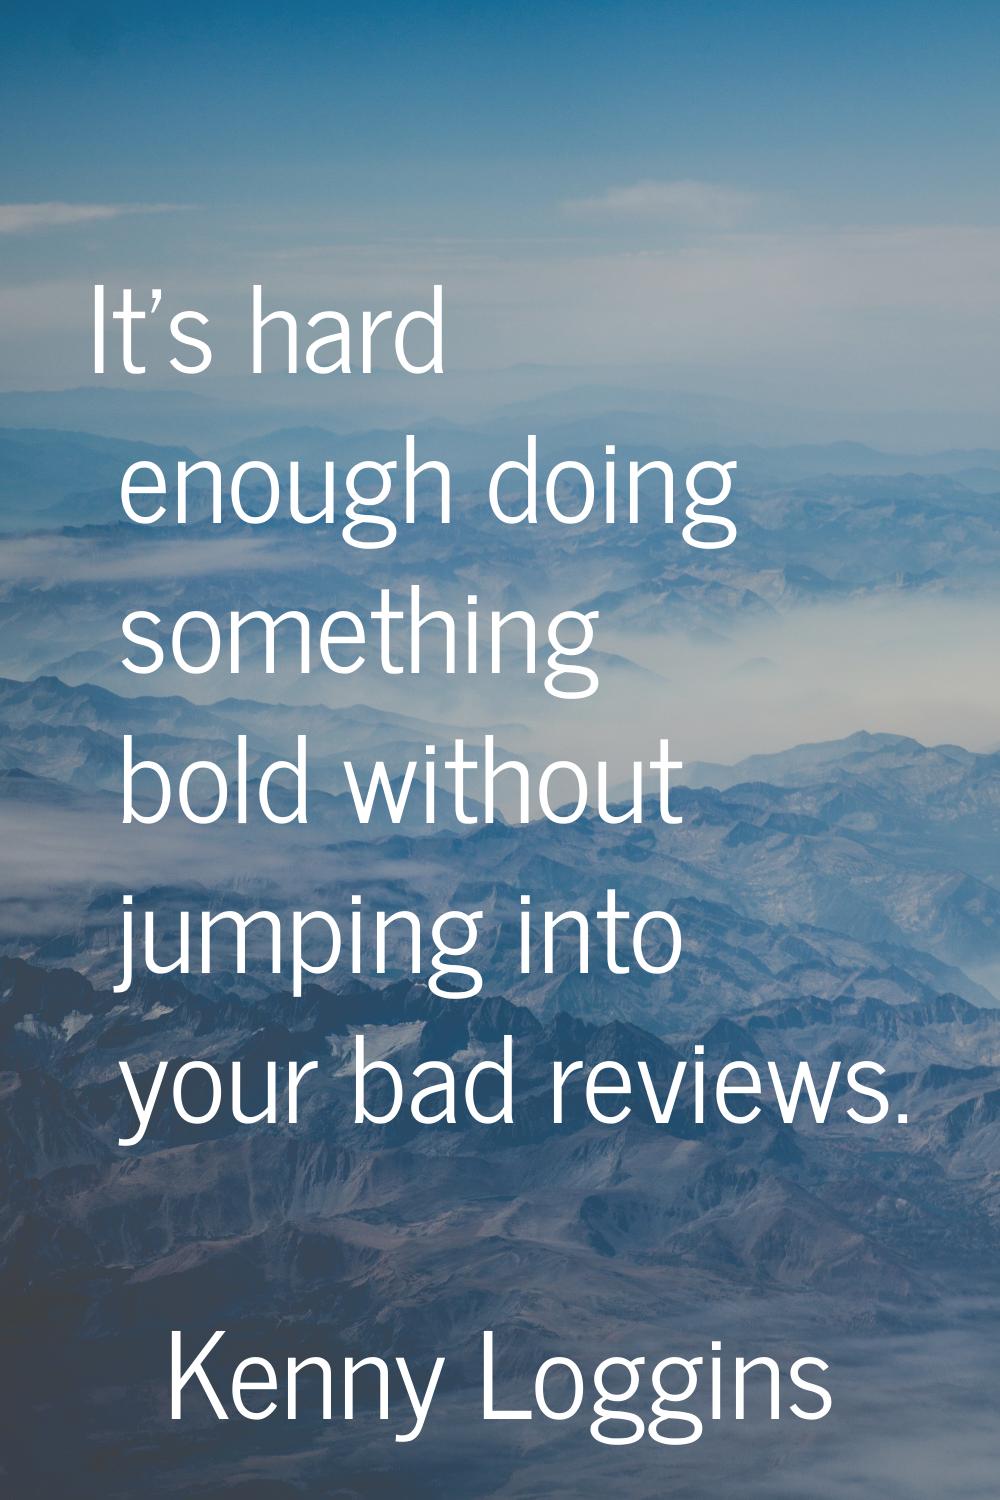 It's hard enough doing something bold without jumping into your bad reviews.